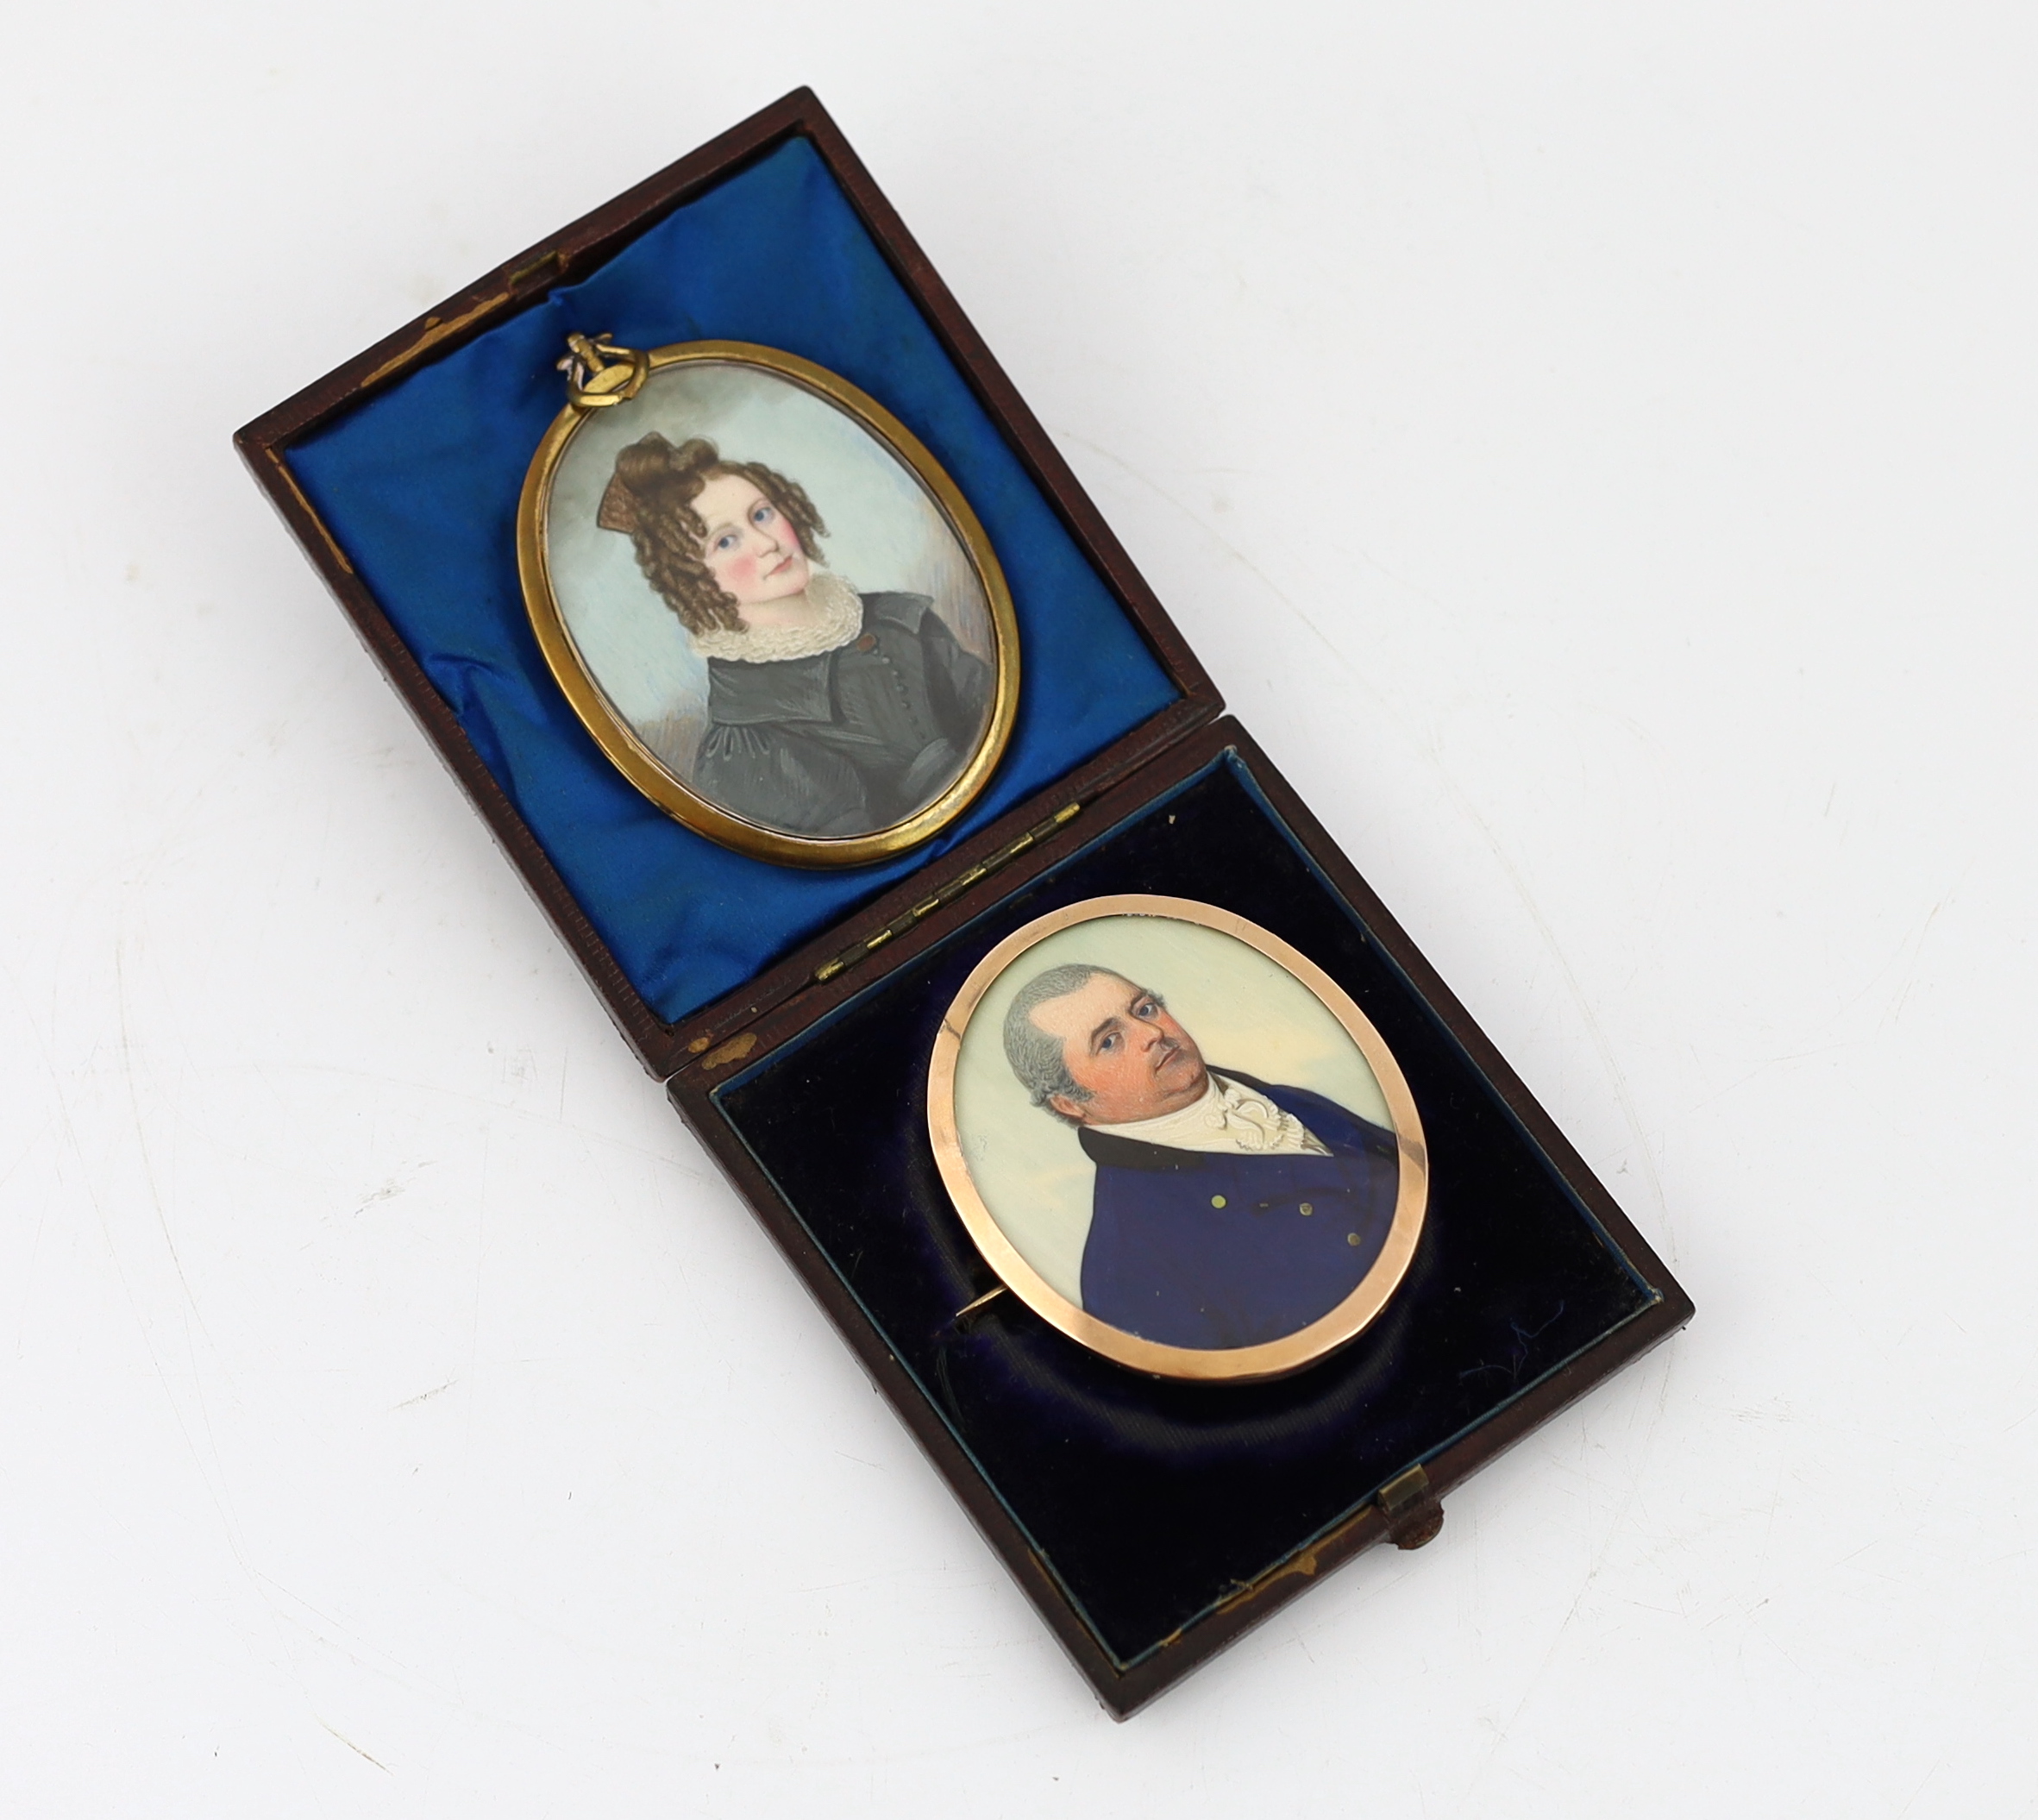 English School circa 1820, Portrait miniatures of a husband and wife, watercolour on ivory (2), 6 x 5cm. & 6.8 x 5cm. CITES Submission reference 34M3AYPS